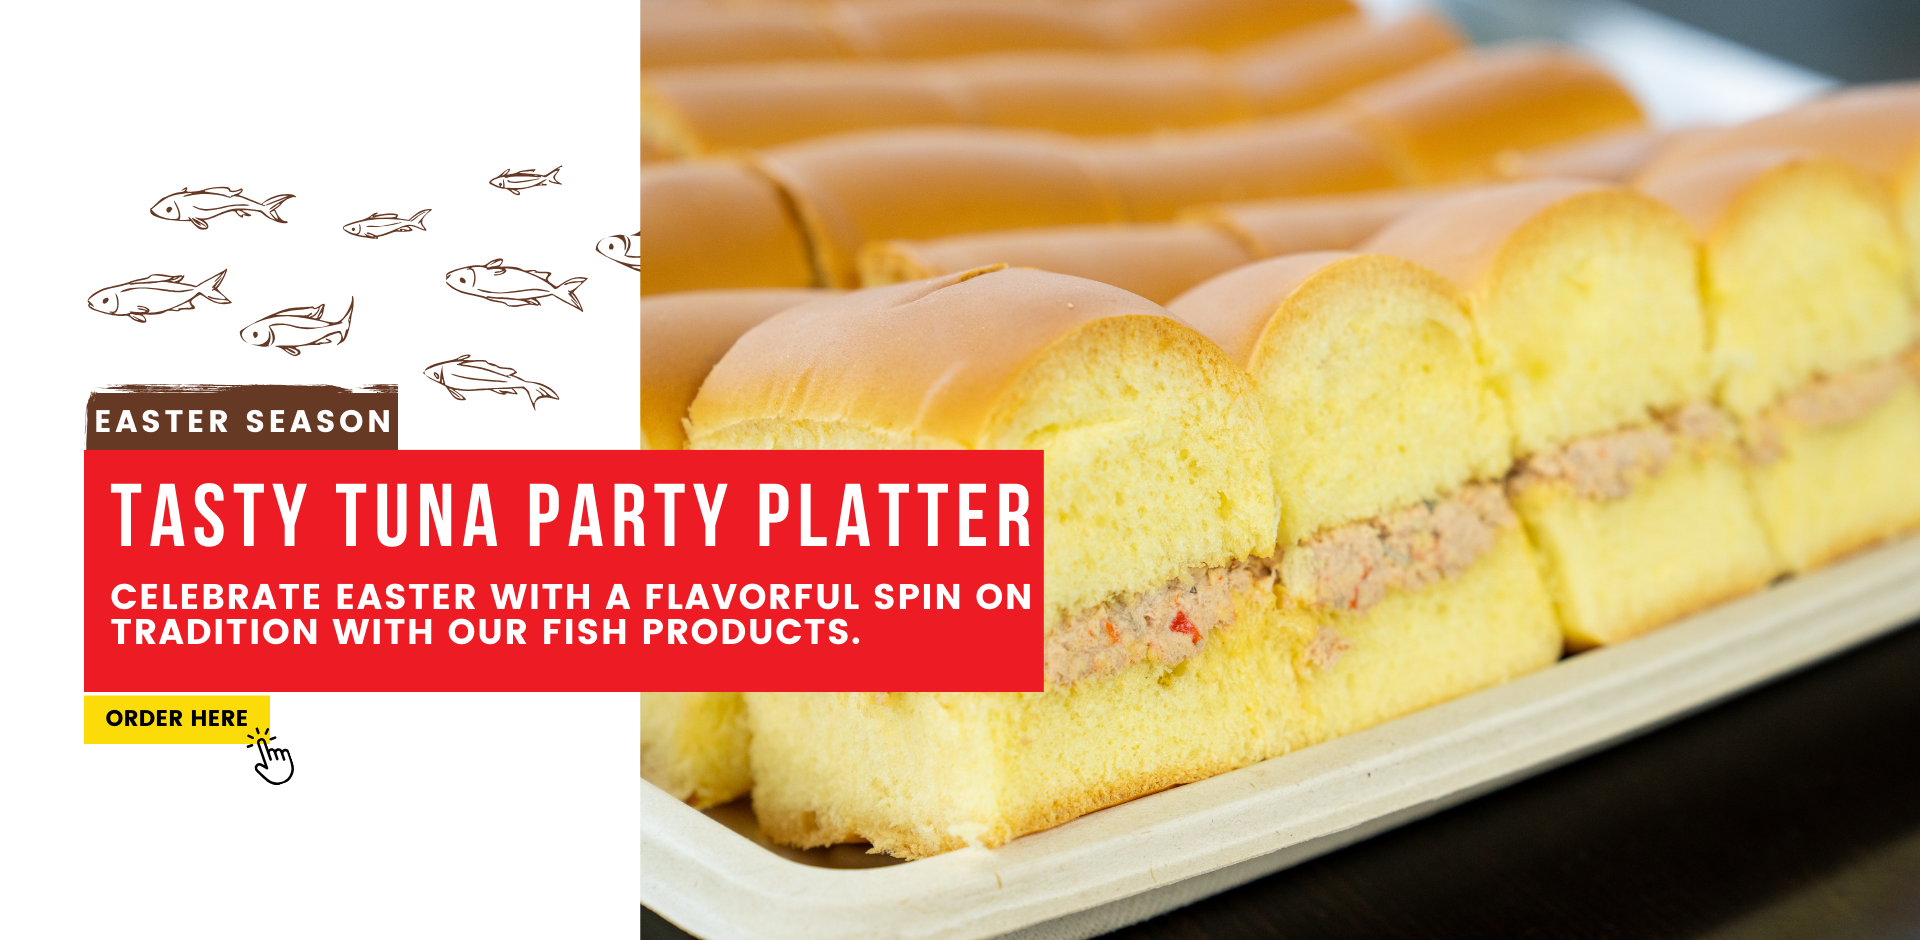 Easter season. Tasty Tuna Party Platter. Celebrate Easter with a flavorful spin on tradition with our fish products. ORDER HERE